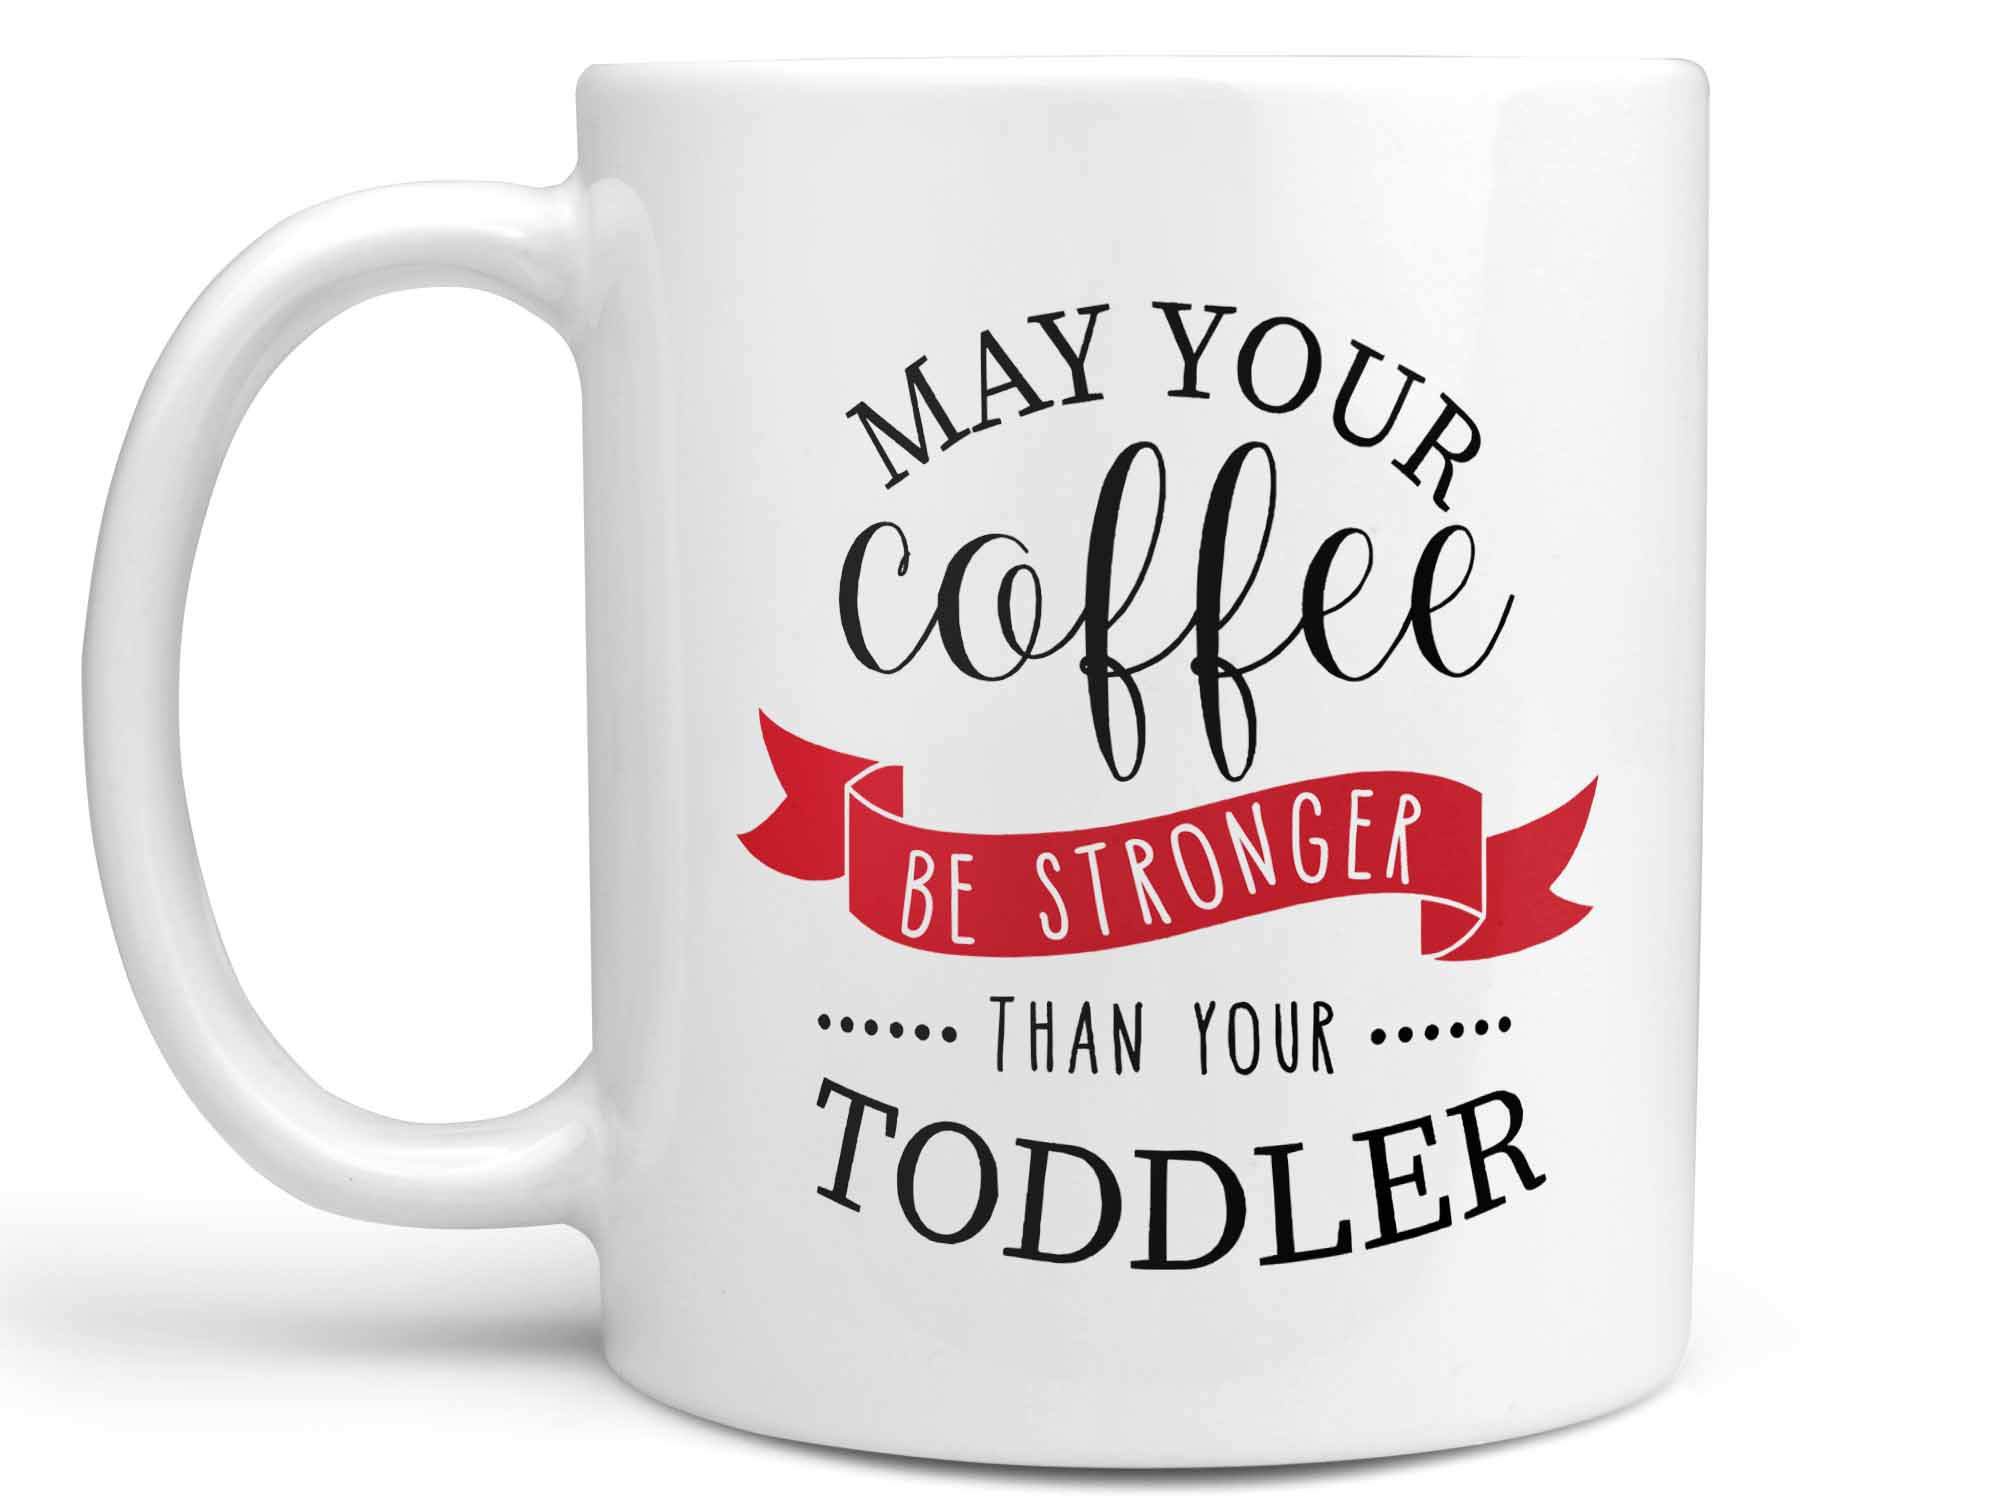 May Your Coffee Be Stronger Than Your Toddler Mug-11oz